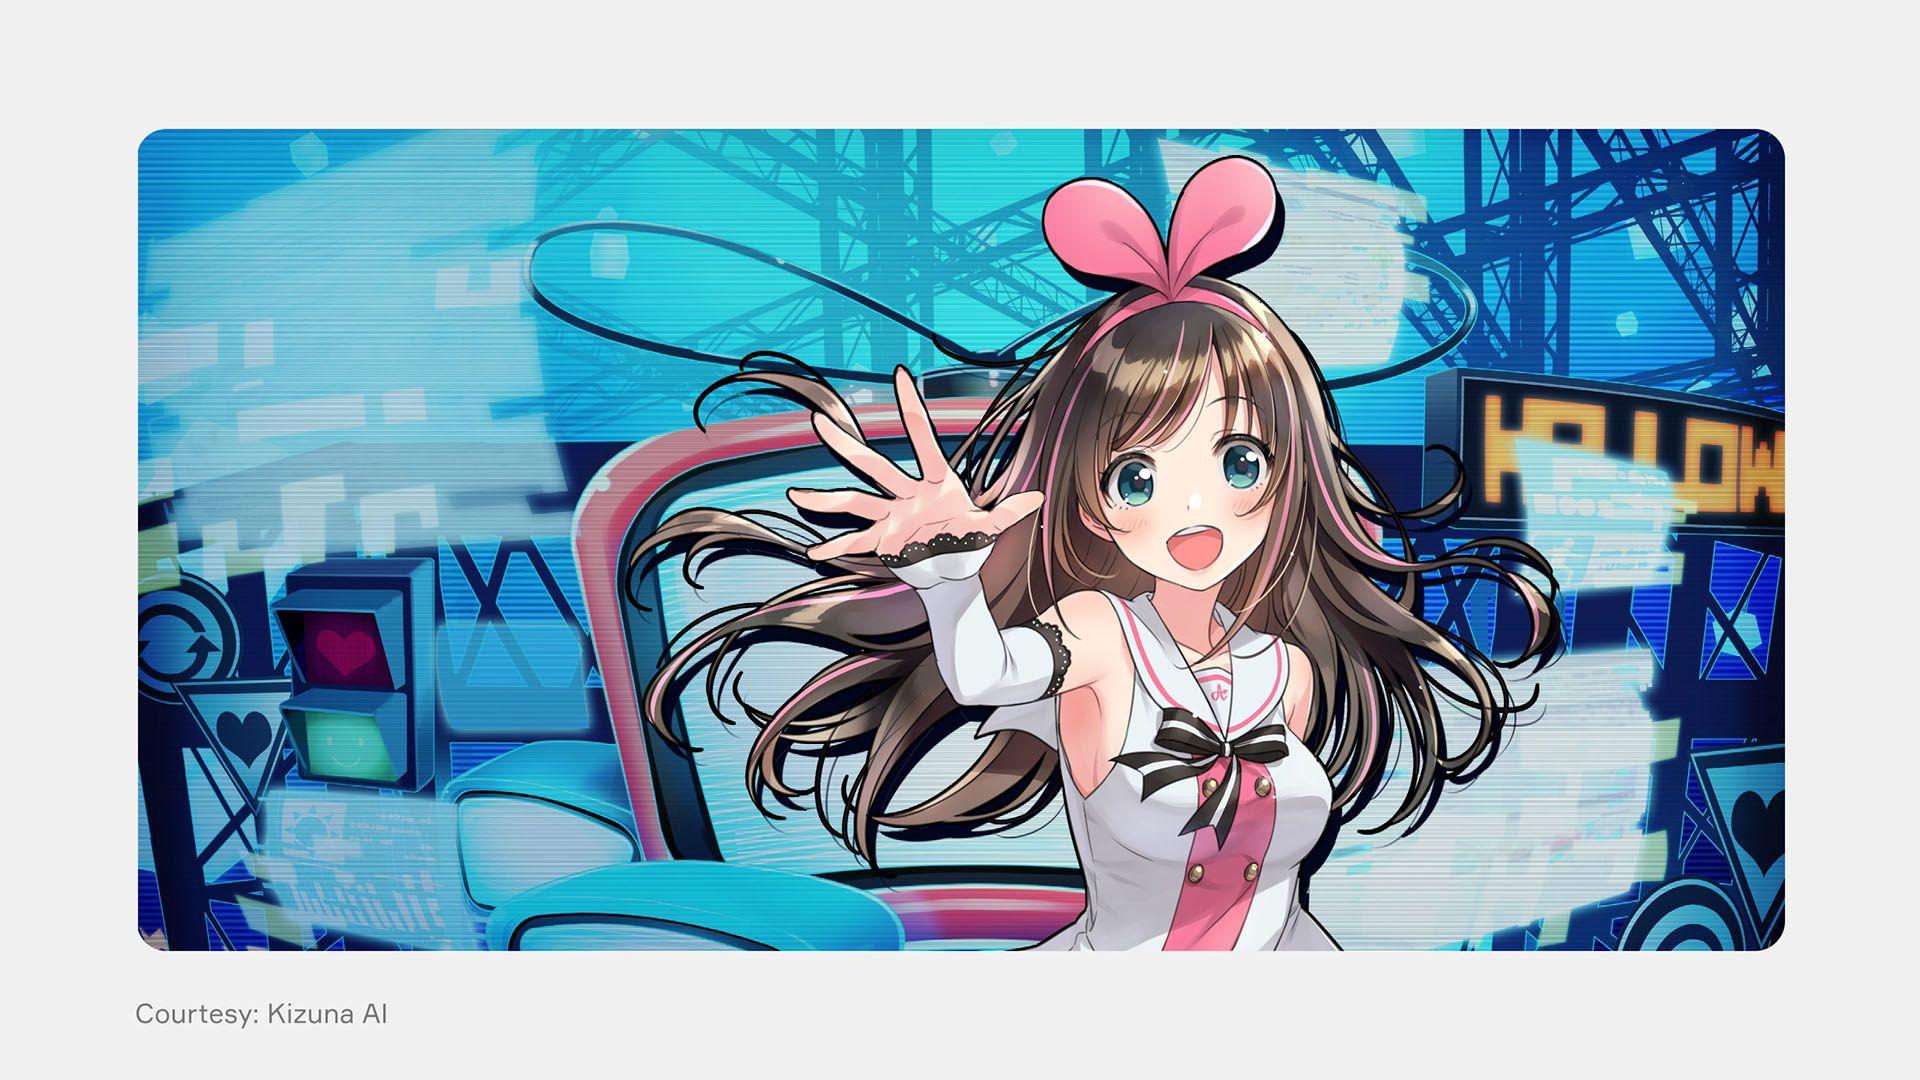 Stream Anonymously: How to Virtualize Yourself and Become a VTuber